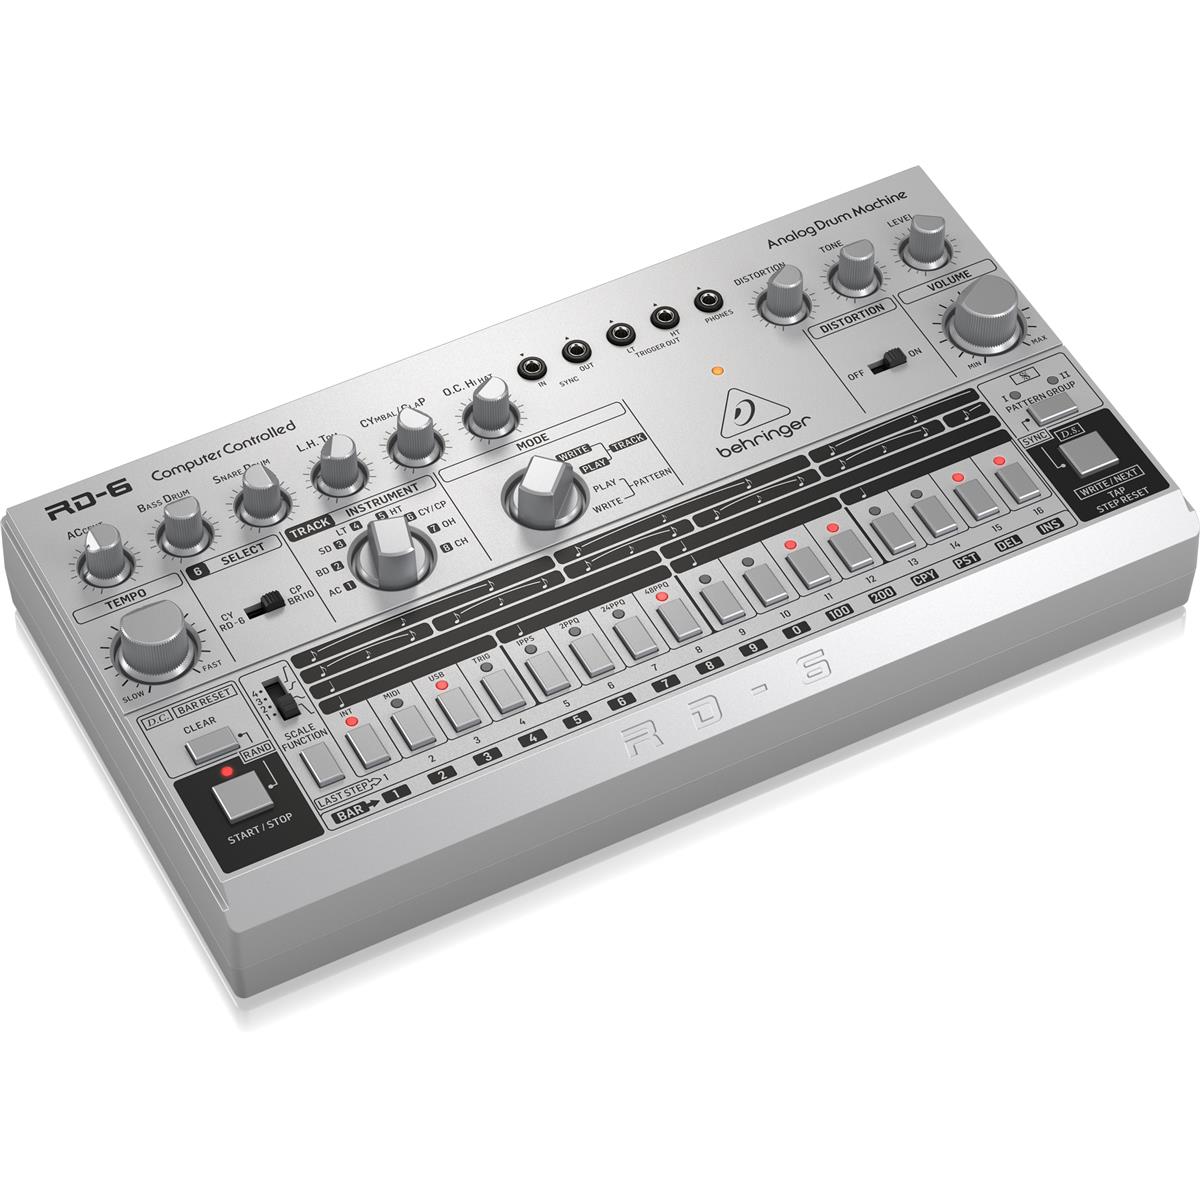 Image of Behringer RD-6-SR Analog Drum Machine with 8 Drum Sounds